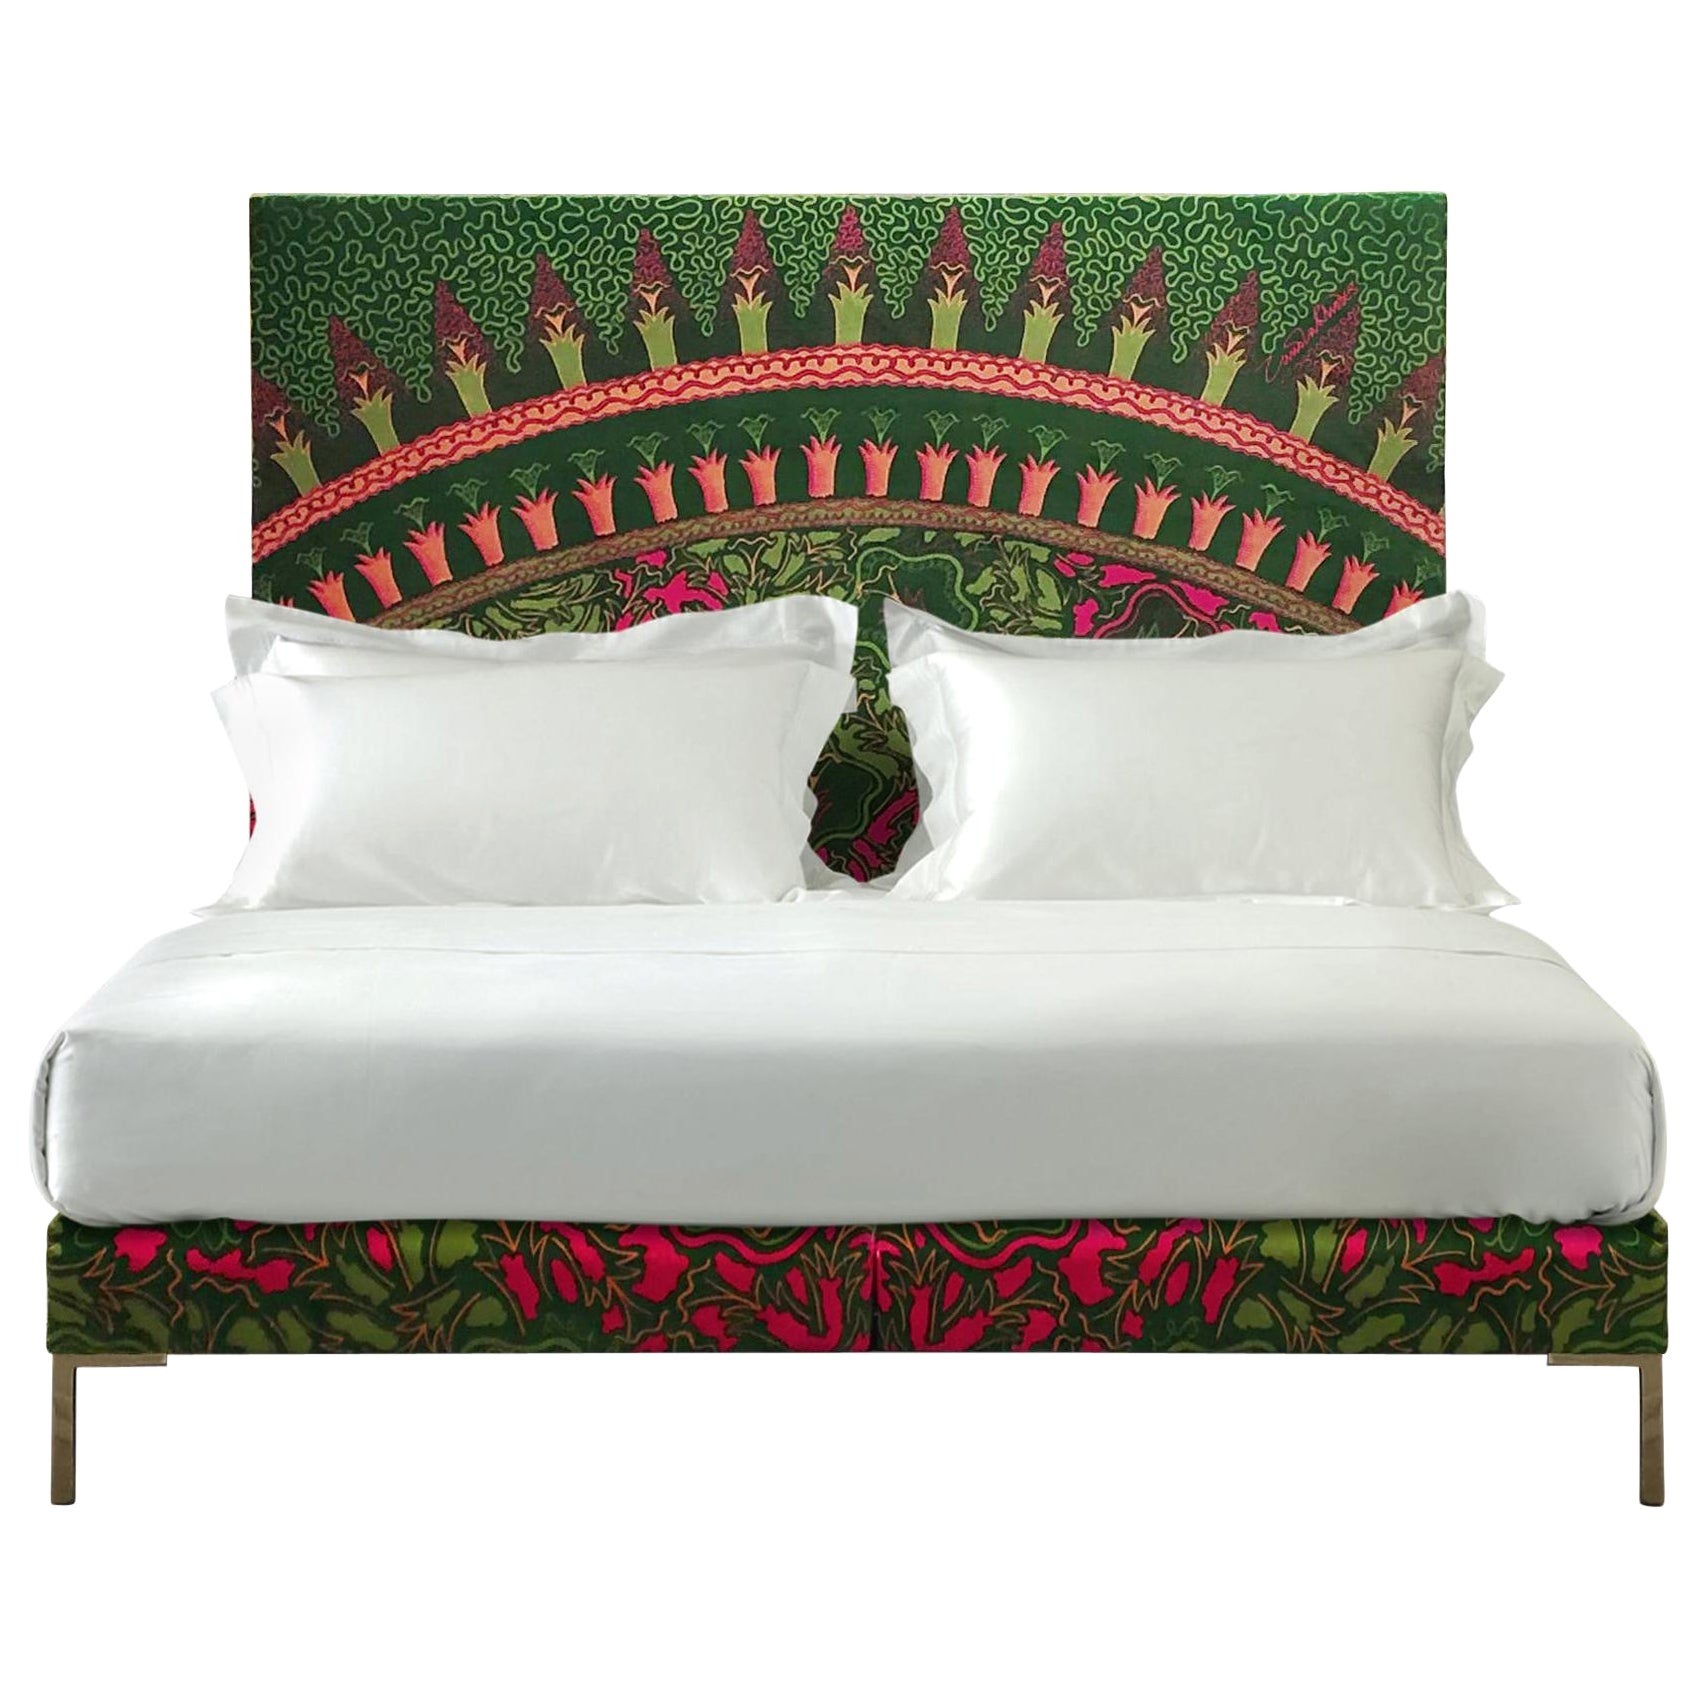 Savoir Lilies Headboard and Nº4 Bed Set, California King Size, by Zandra Rhodes For Sale